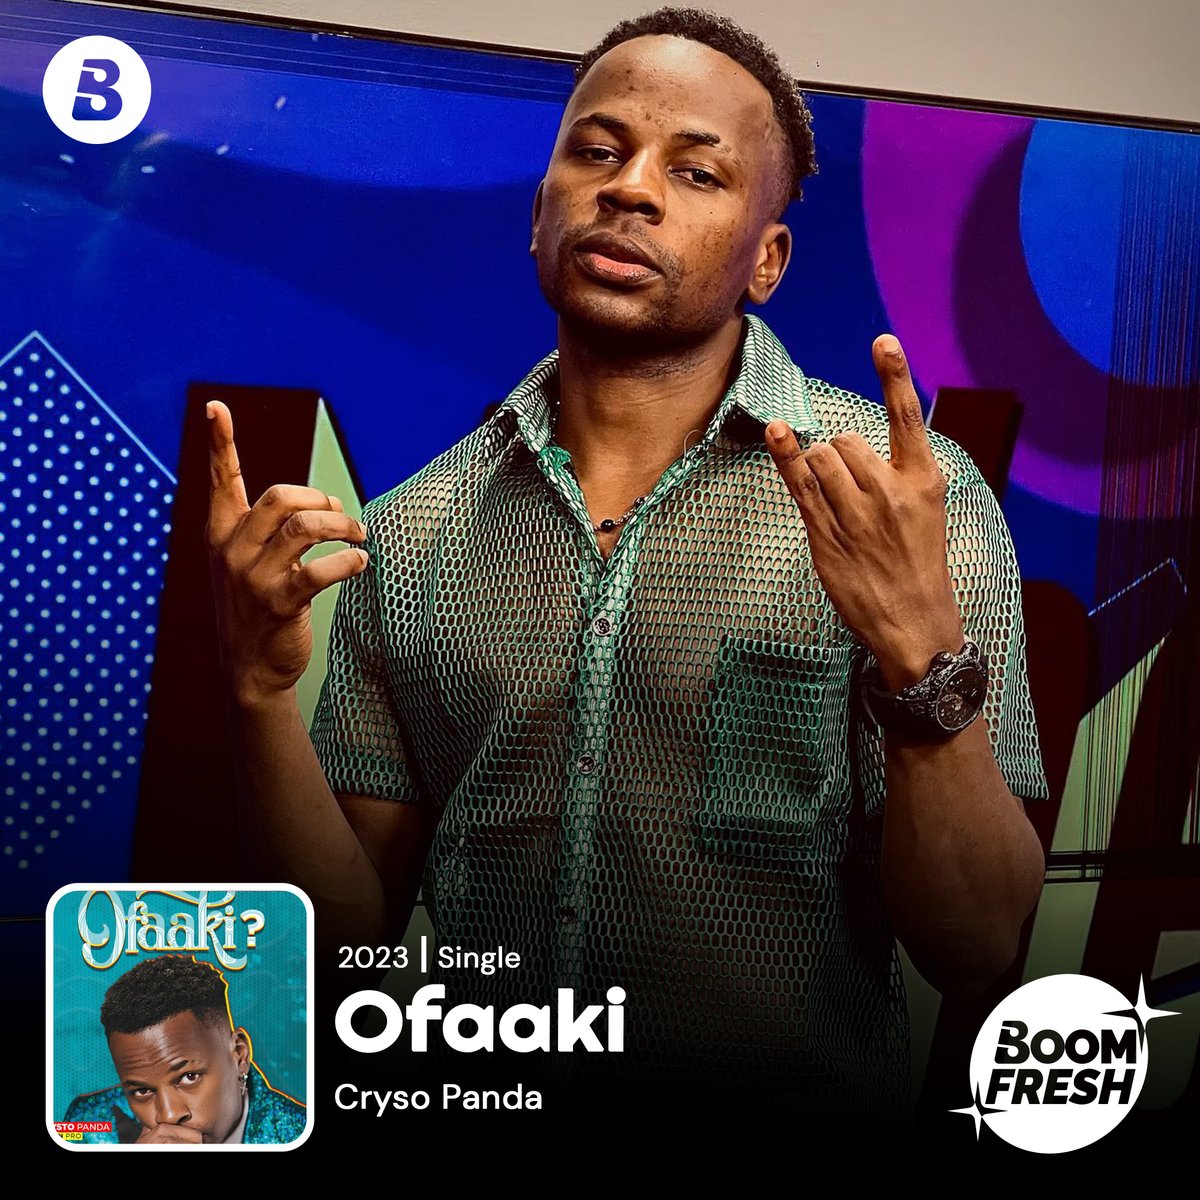 🚨BOOM FRESH🚨 #Ofaaki is a fresh @CrystoPanda tune now streaming on #boomplaymusic Check it out on #boomplay